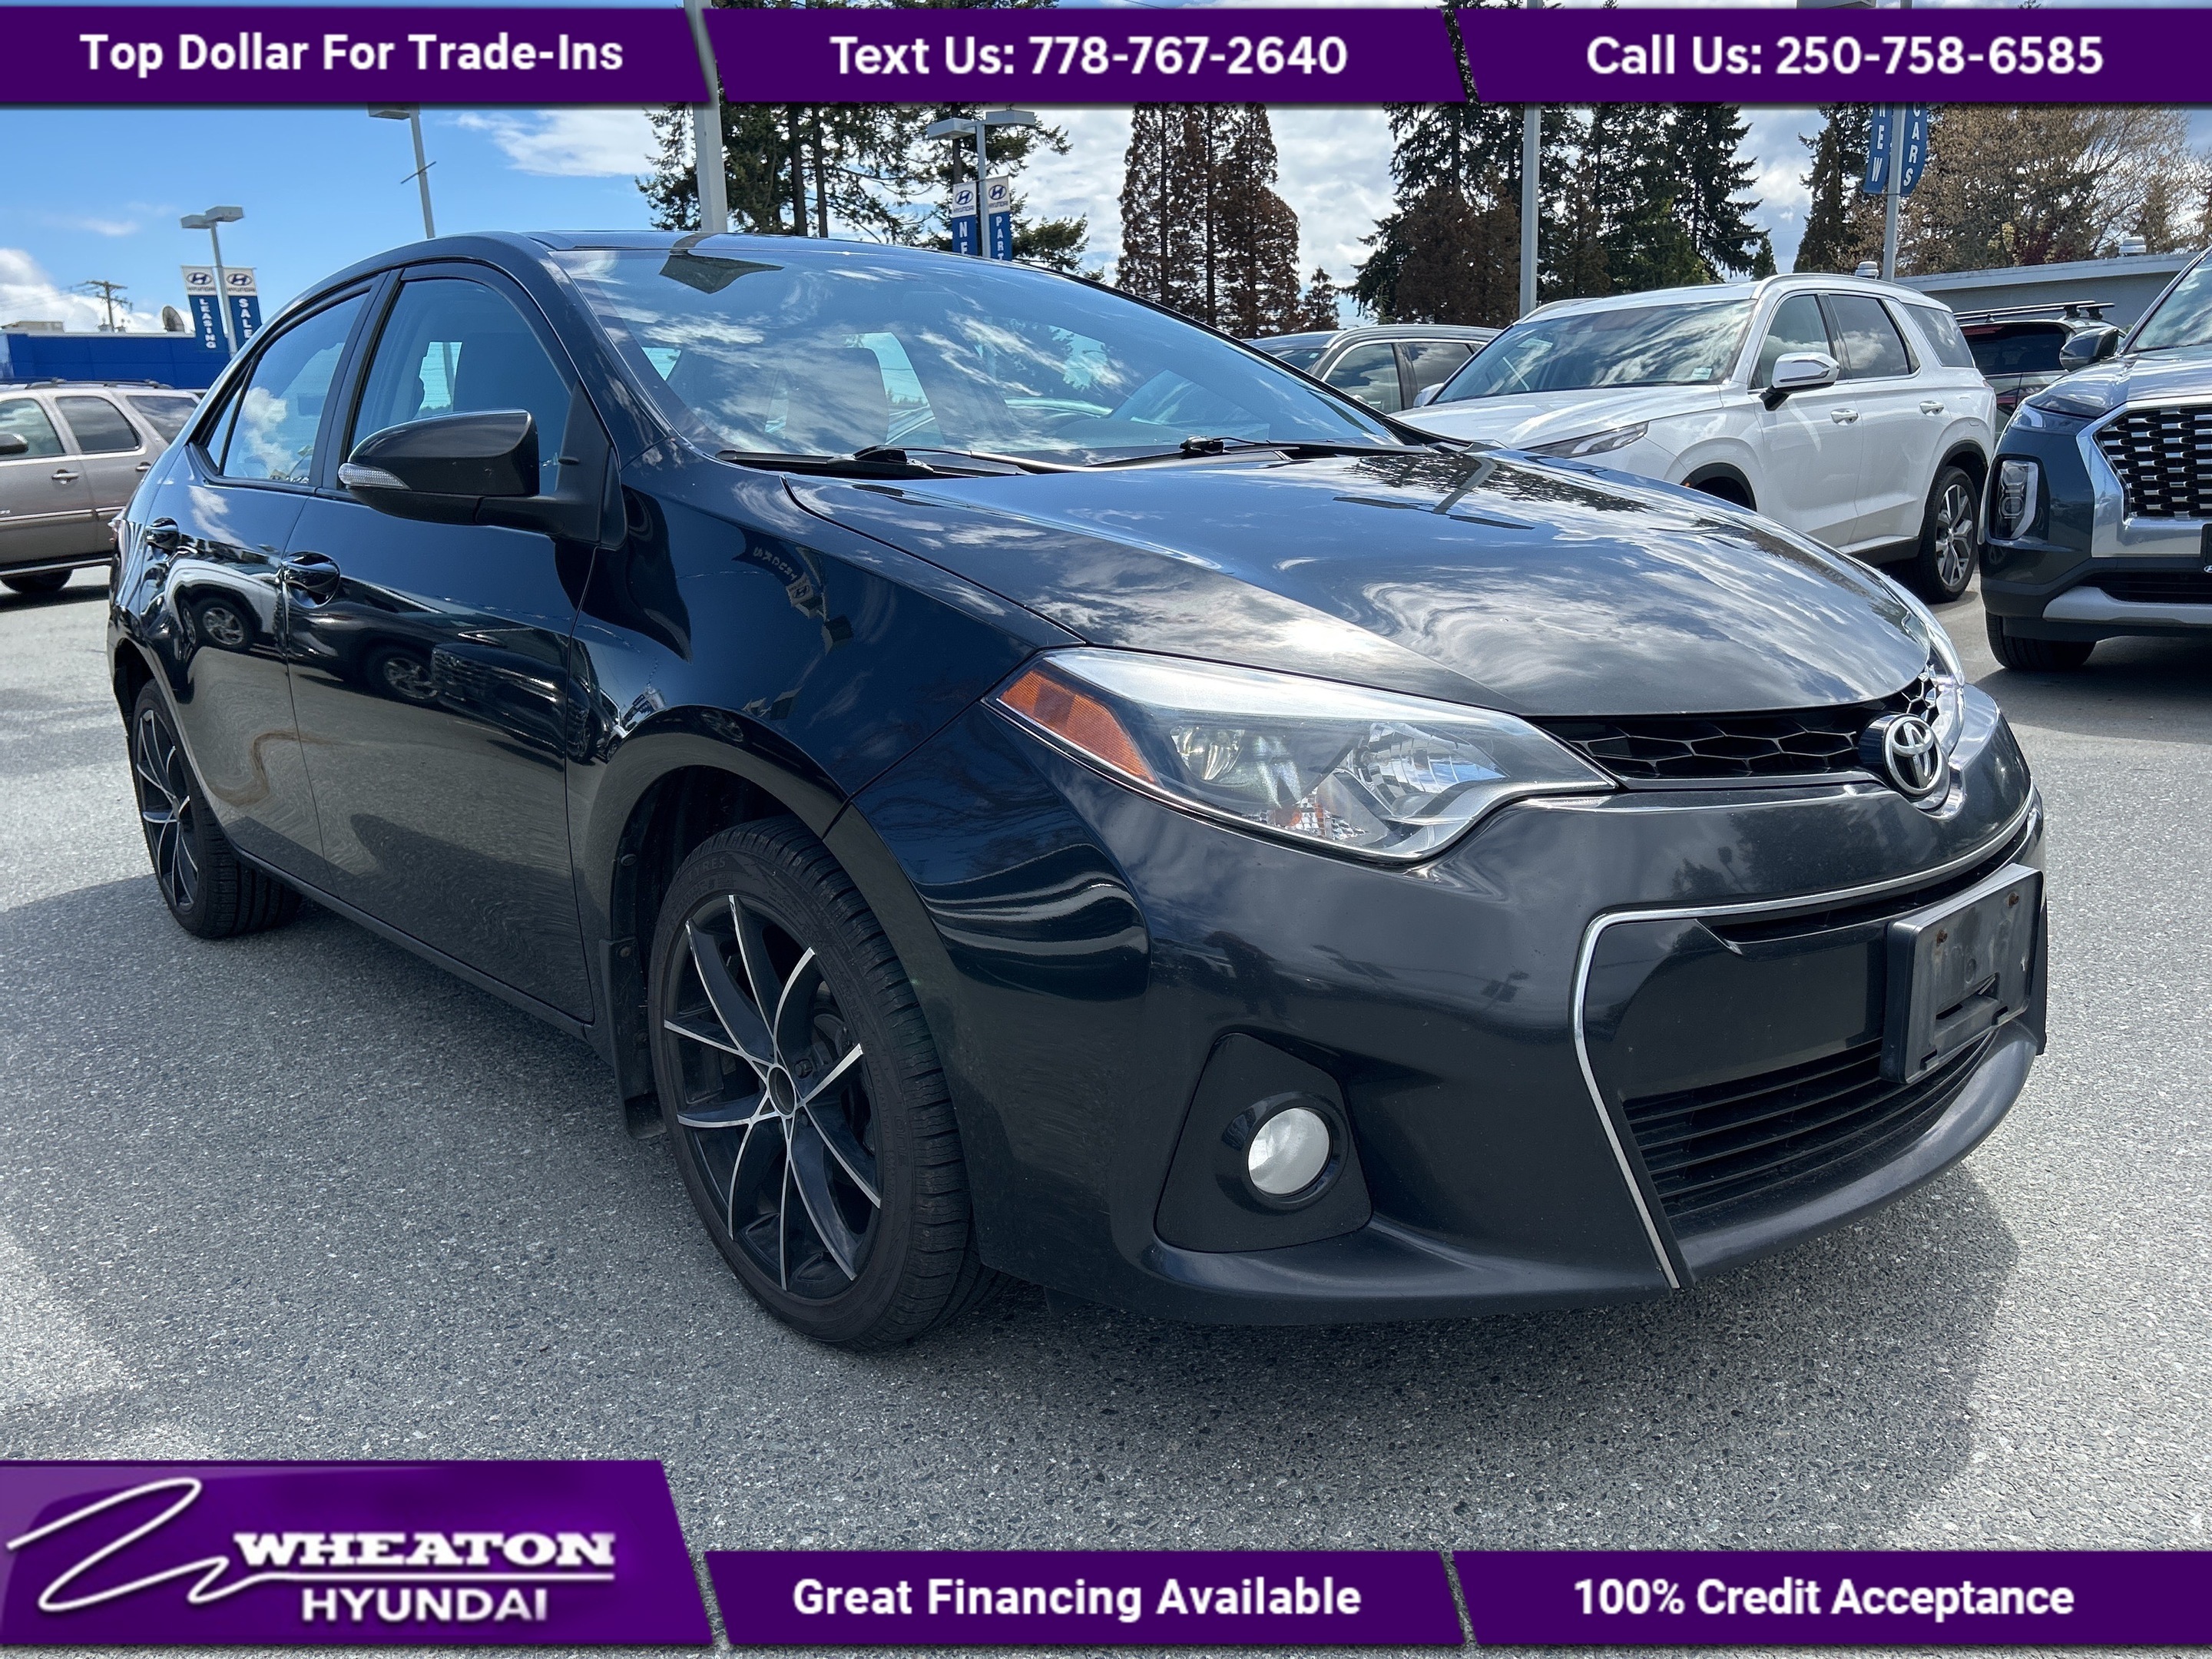 2014 Toyota Corolla S, One Owner, Local, Trade in, Leather, Heated Sea